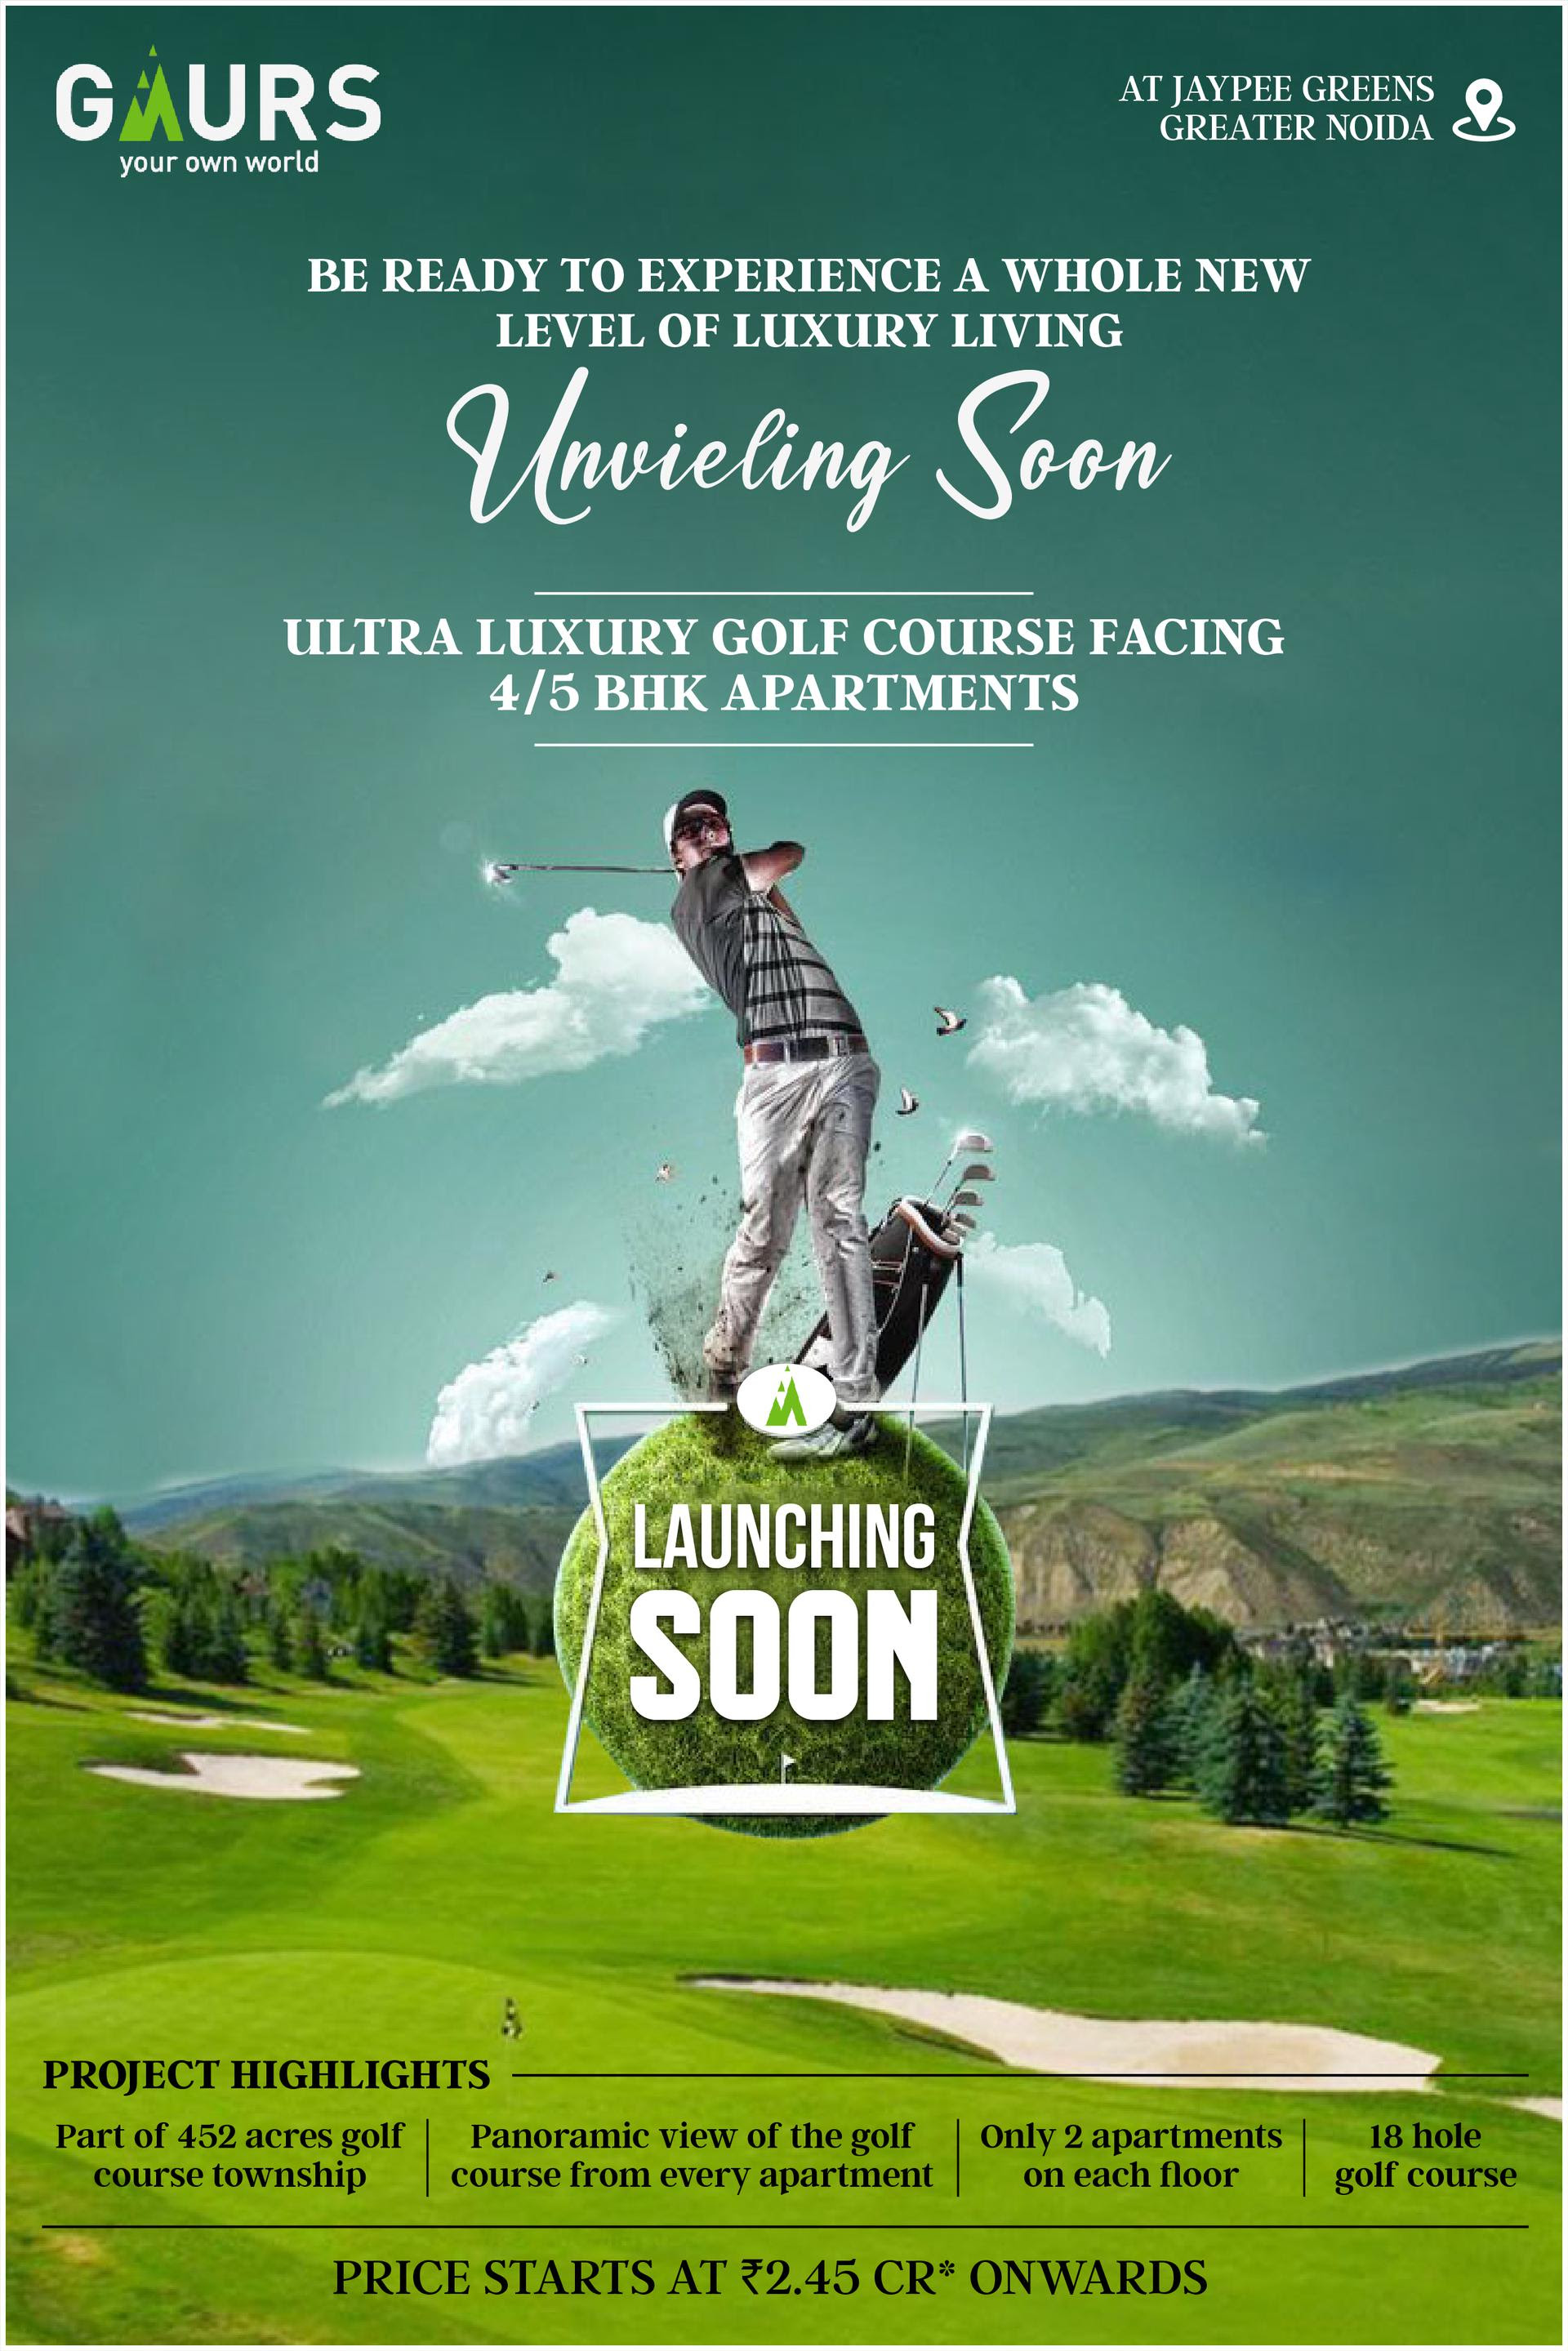 Ultre luxury golf course facing 4 and 5 BHK apartments Rs 2.45 Cr at Gaur Jaypee Green in Greater Noida